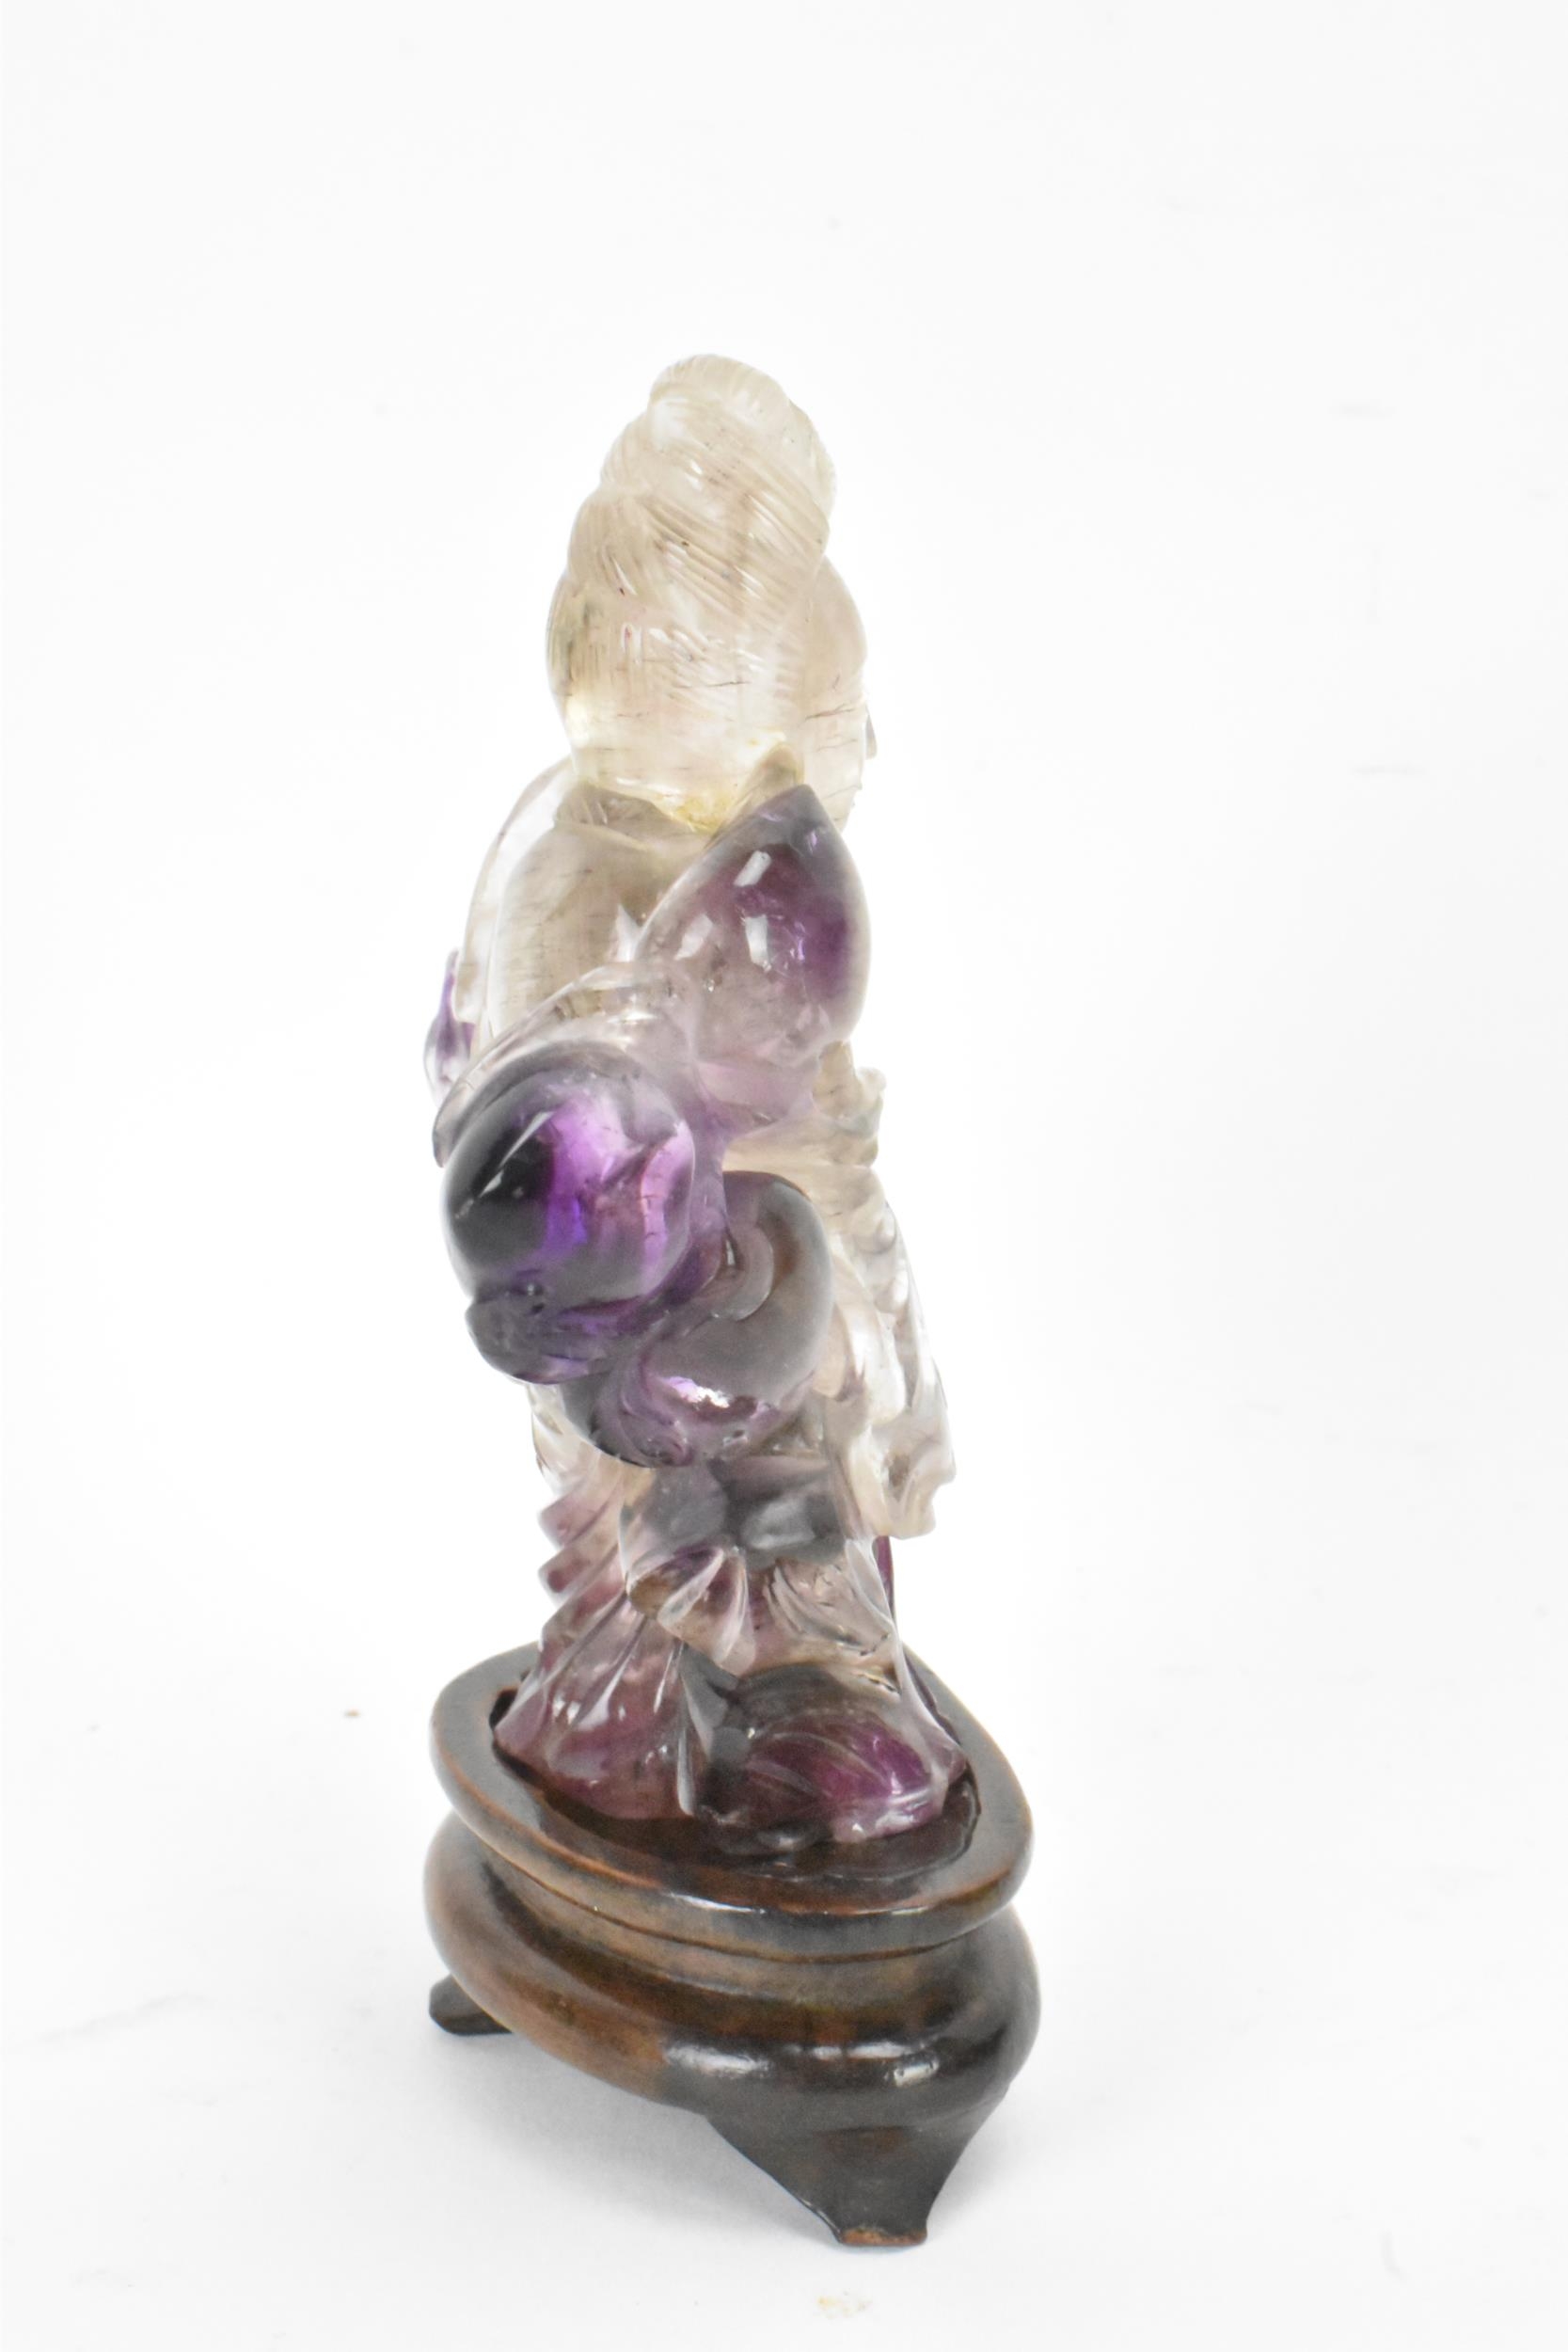 A 20th century Chinese carved amethyst figure of Guanyin, the goddess of mercy, in a seated position - Image 4 of 7